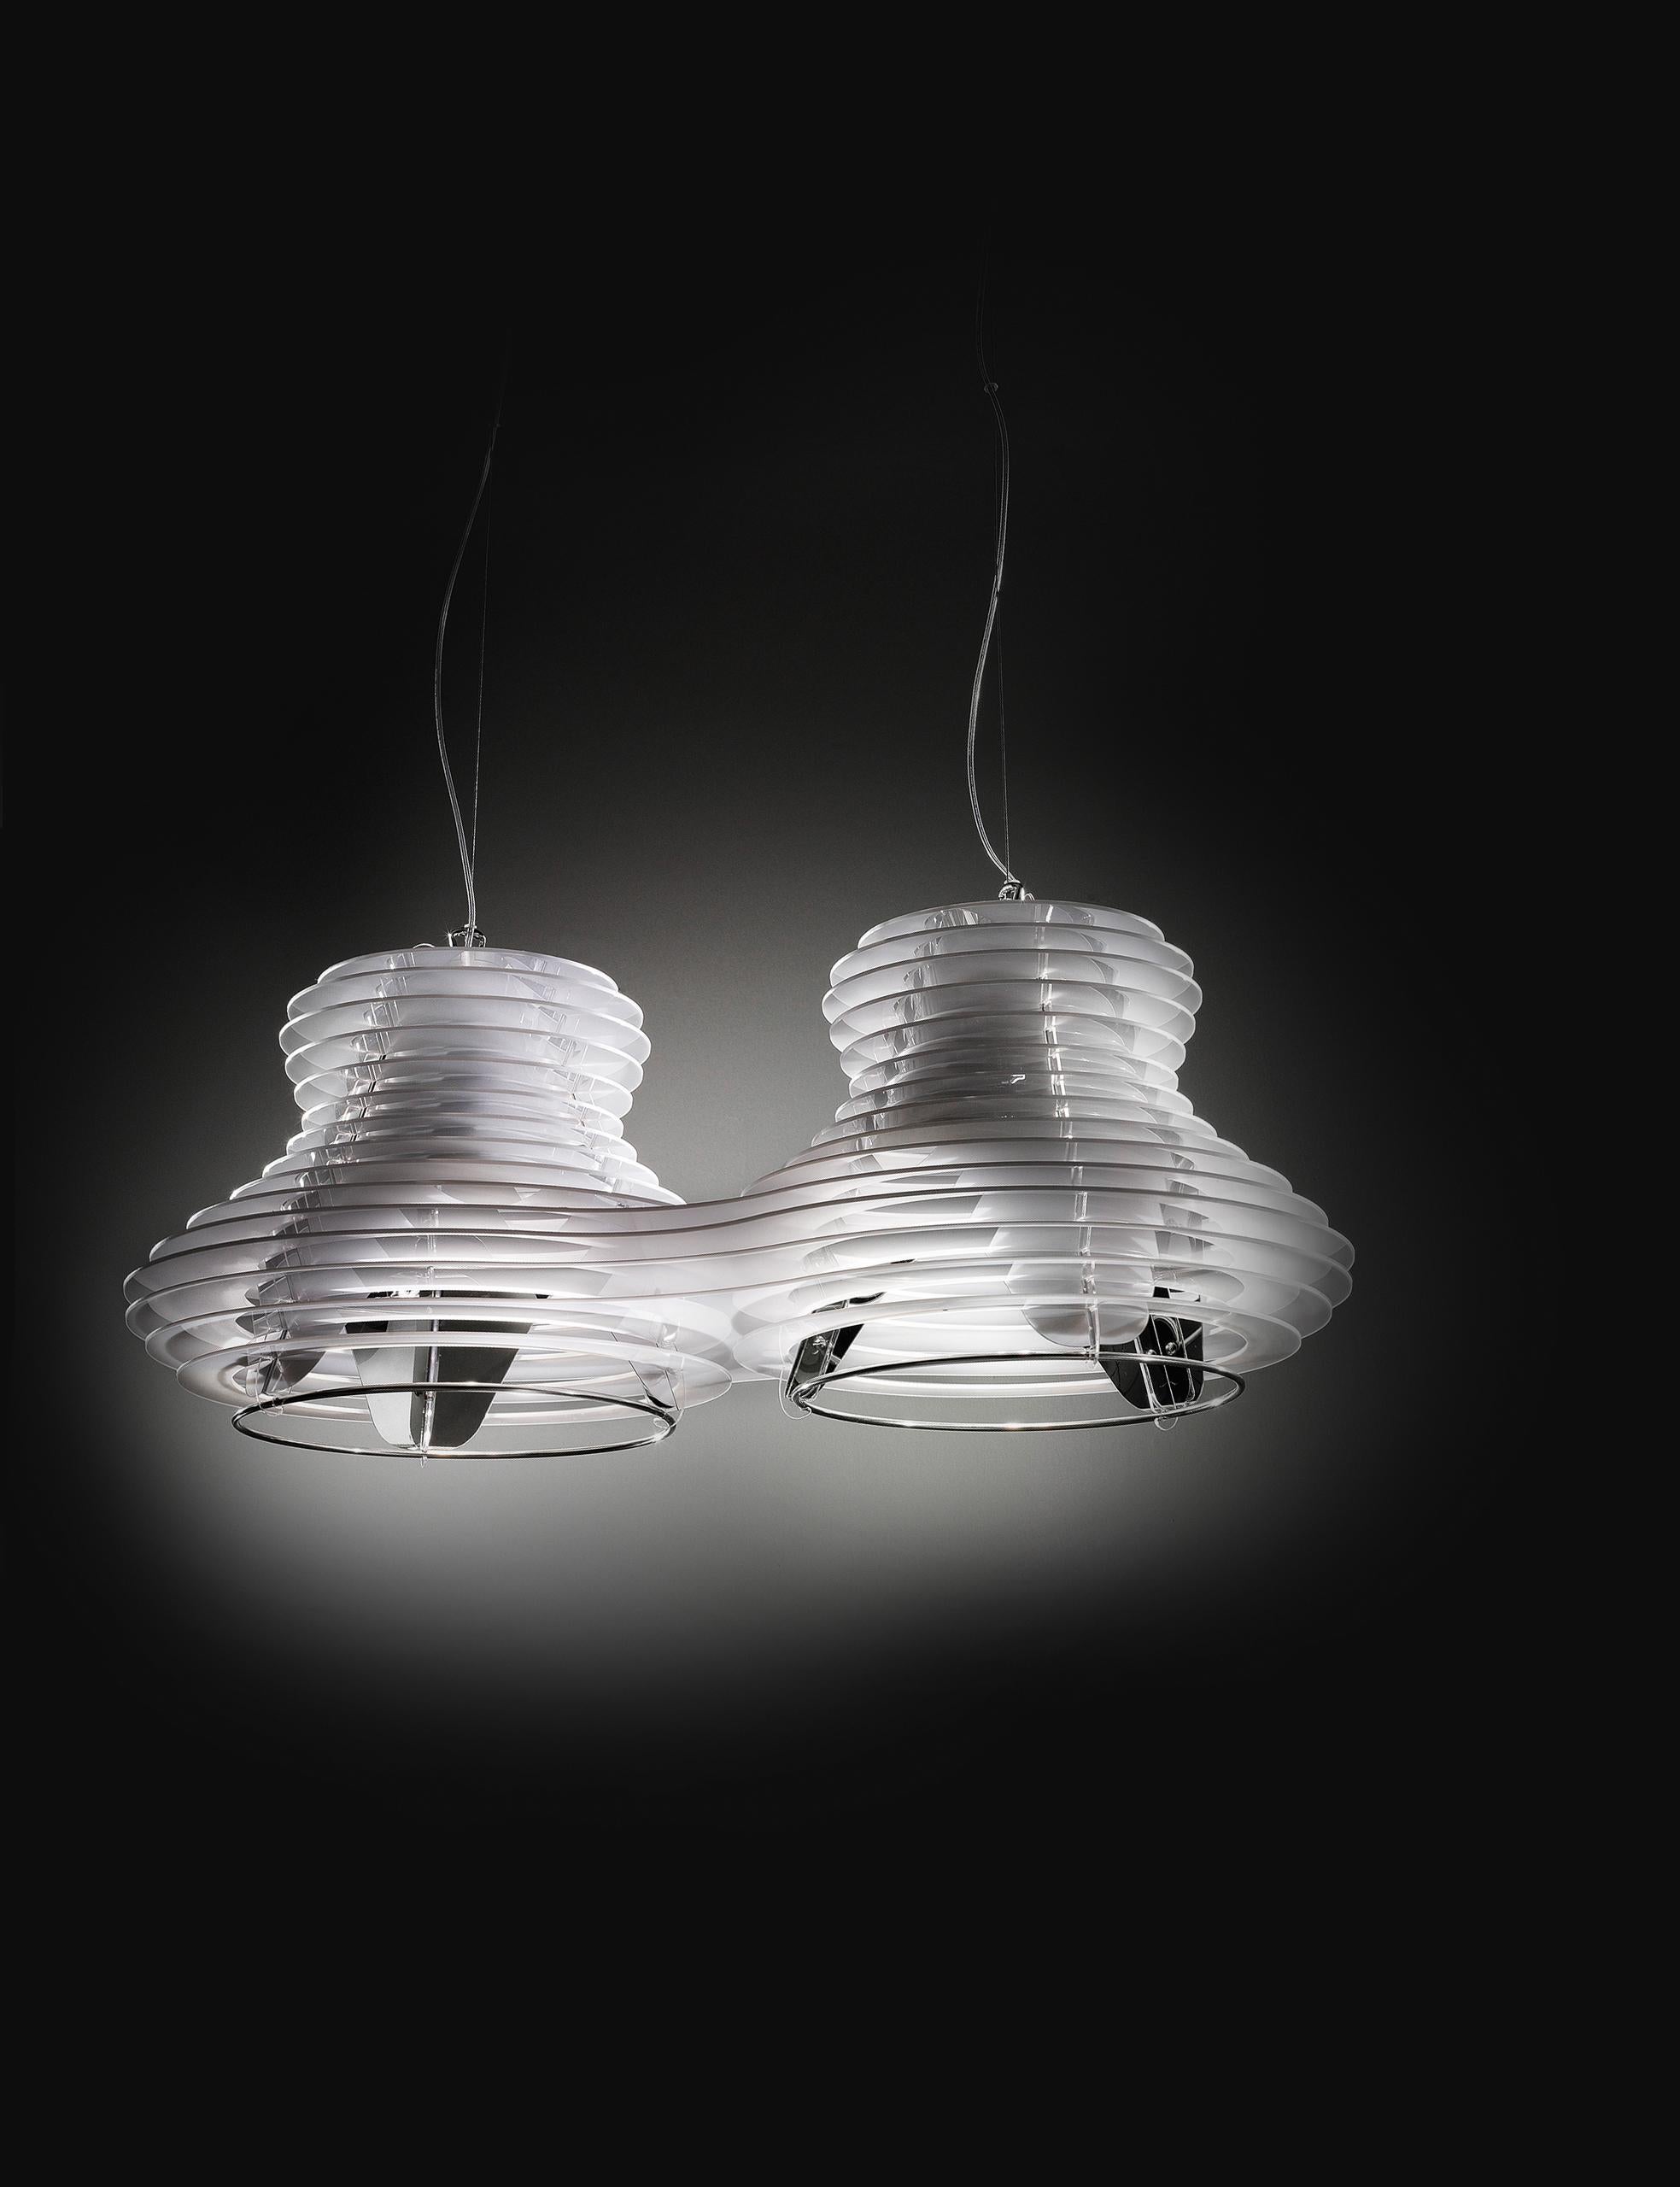 A modern shape, rigorous geometry, rigid and penetrating lines that soften around a central cone surrounded by layered rings that play with the light without losing form. The lamp’s curves were inspired by the evocative rolling hills of the Tuscan